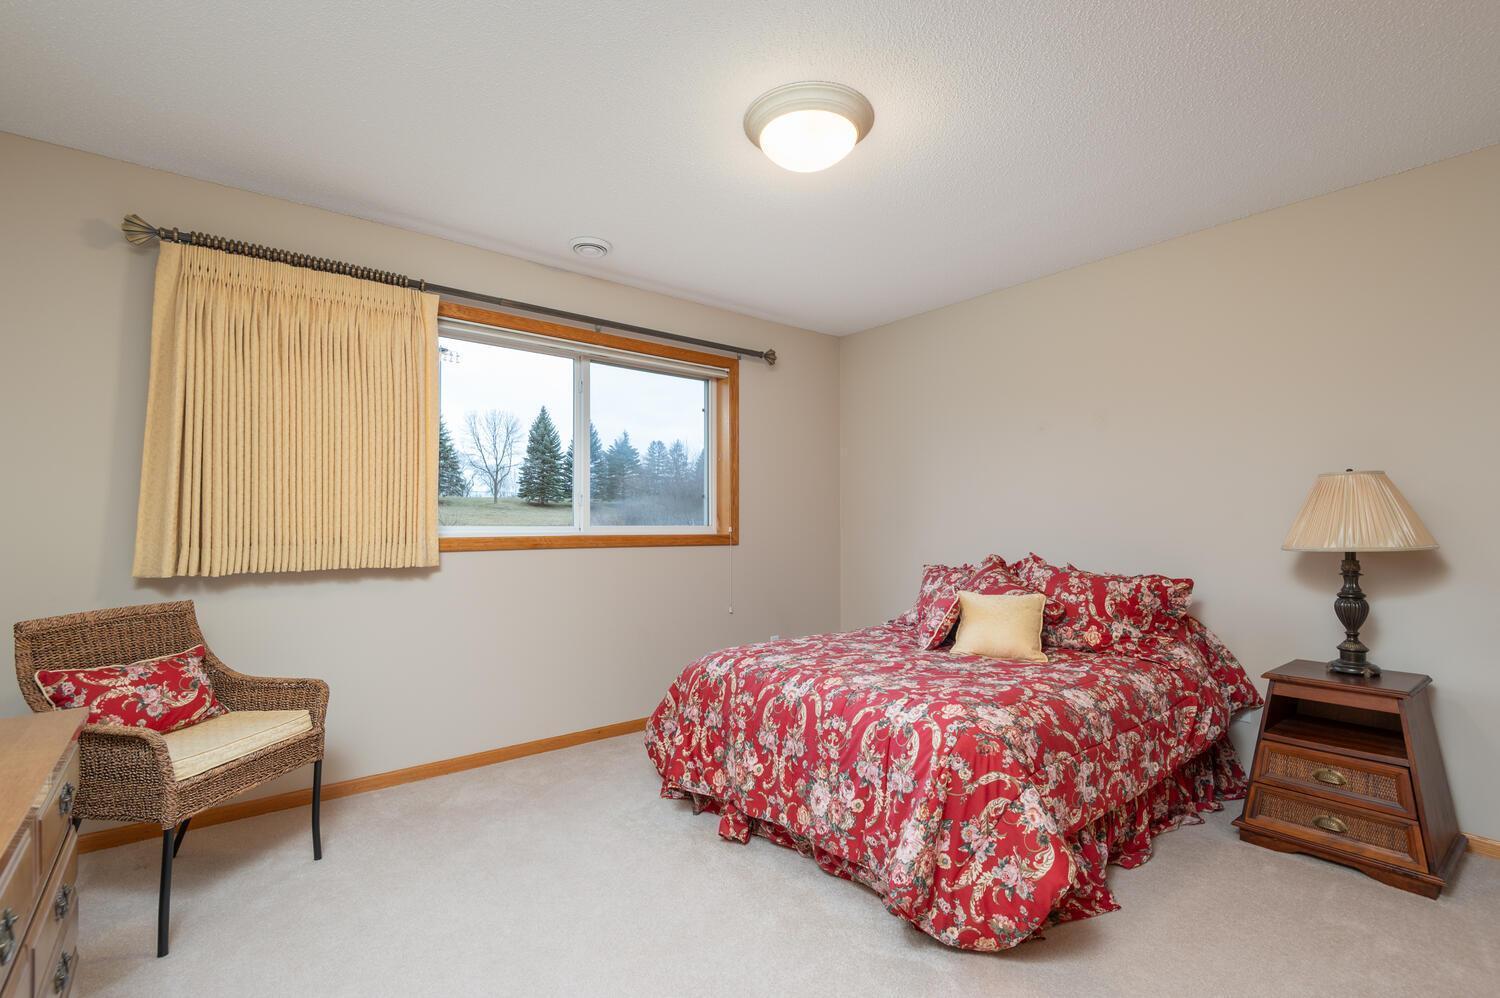 Both bedrooms have oversize windows looking out to mature trees and the wetland.